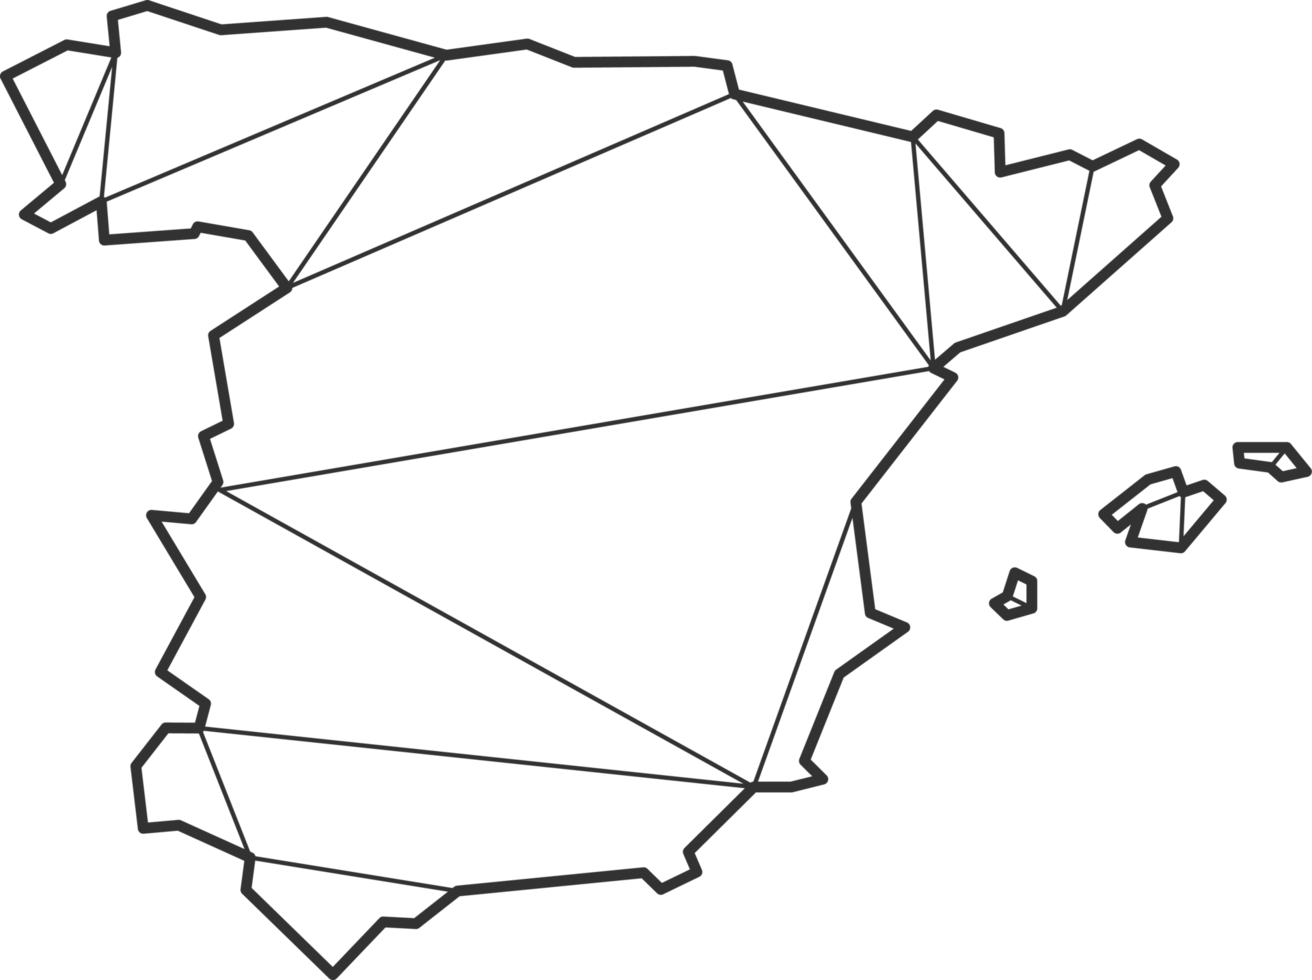 Mosaic triangles map style of Spain. png